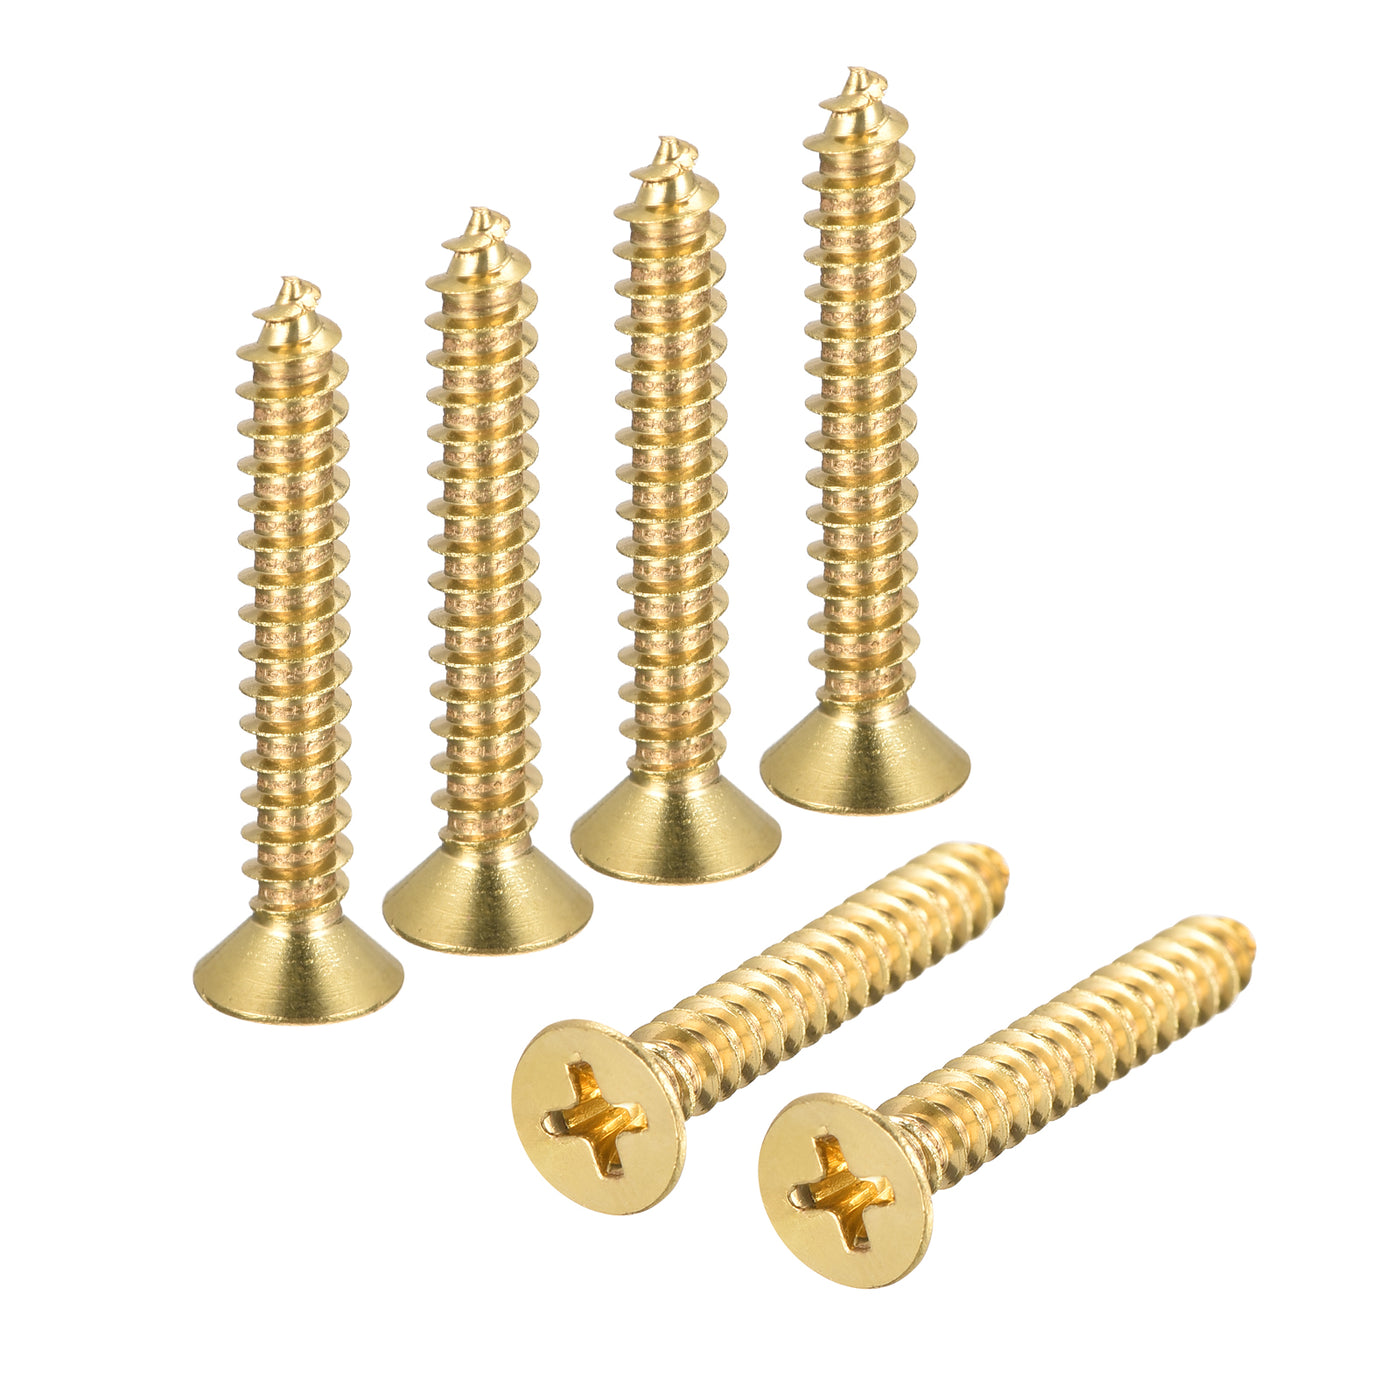 uxcell Uxcell Brass Wood Screws, M5x30mm Phillips Flat Head Self Tapping Connector for Door Hinges, Wooden Furniture, Home Appliances 6Pcs